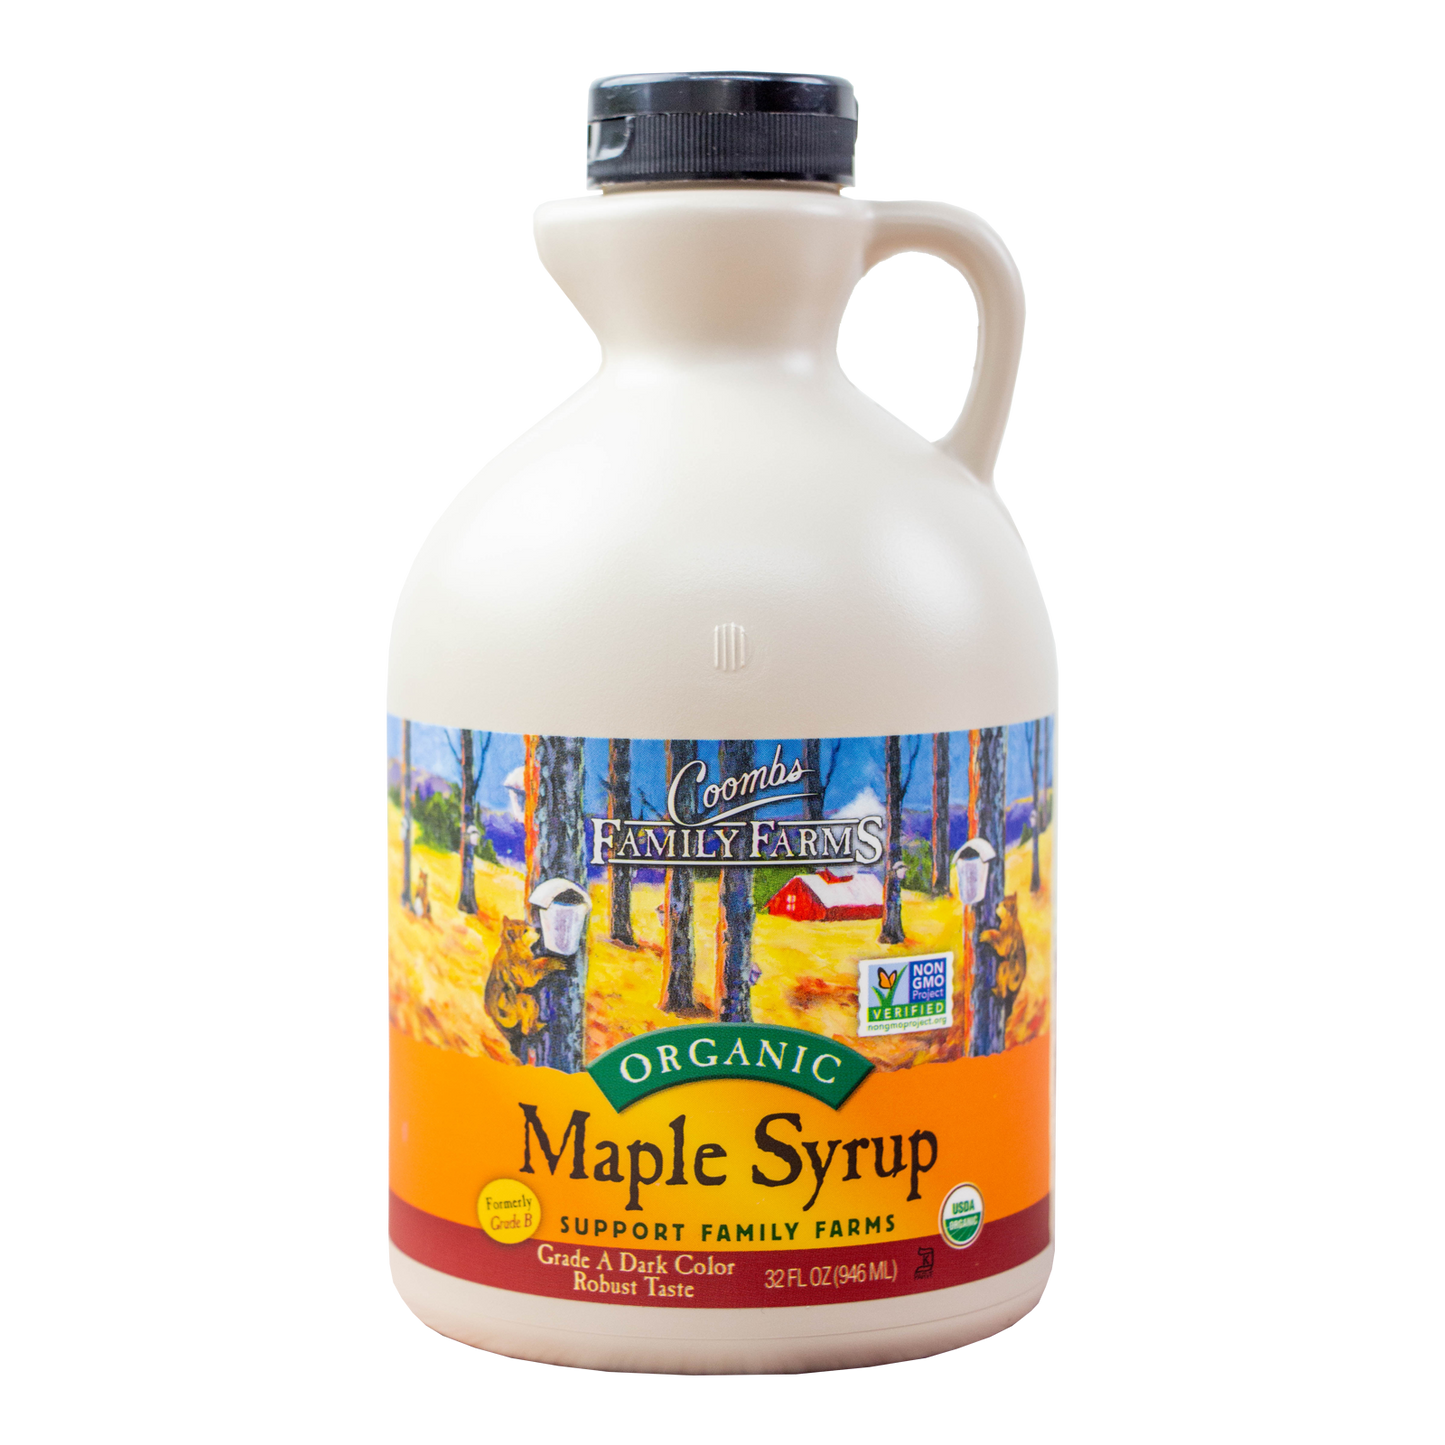 Coomb's Family Farms - Maple Syrup (32 oz)